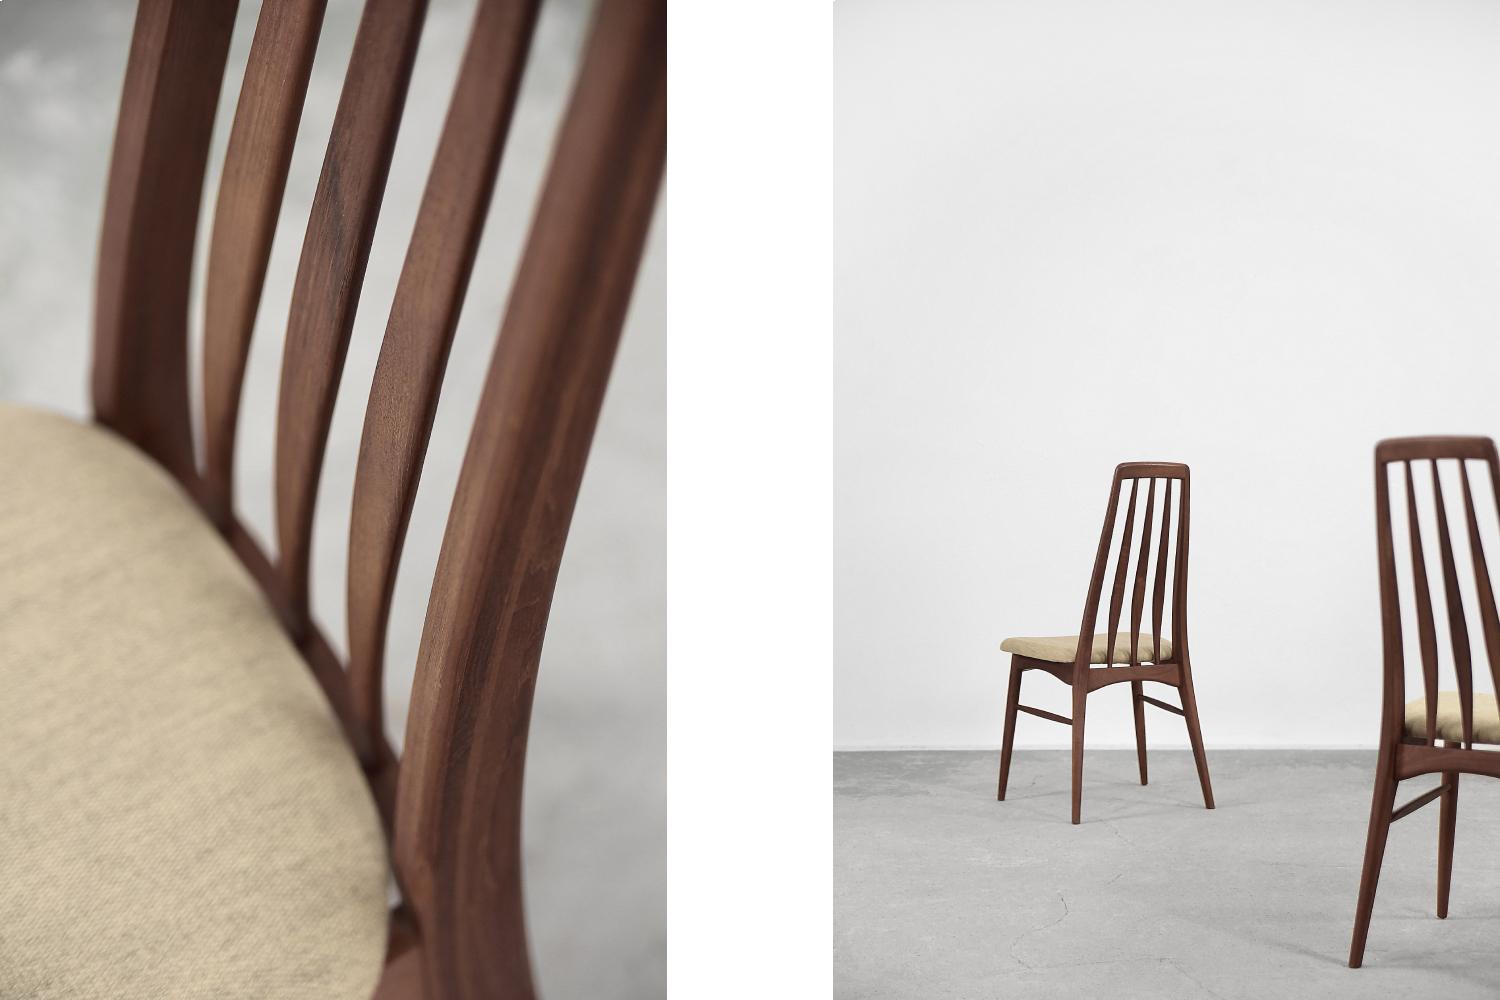 Pair of Teak Wood & Fabric Eva Chairs by Niels Koefoed for Koefoeds Hornslet In Good Condition For Sale In Warszawa, Mazowieckie